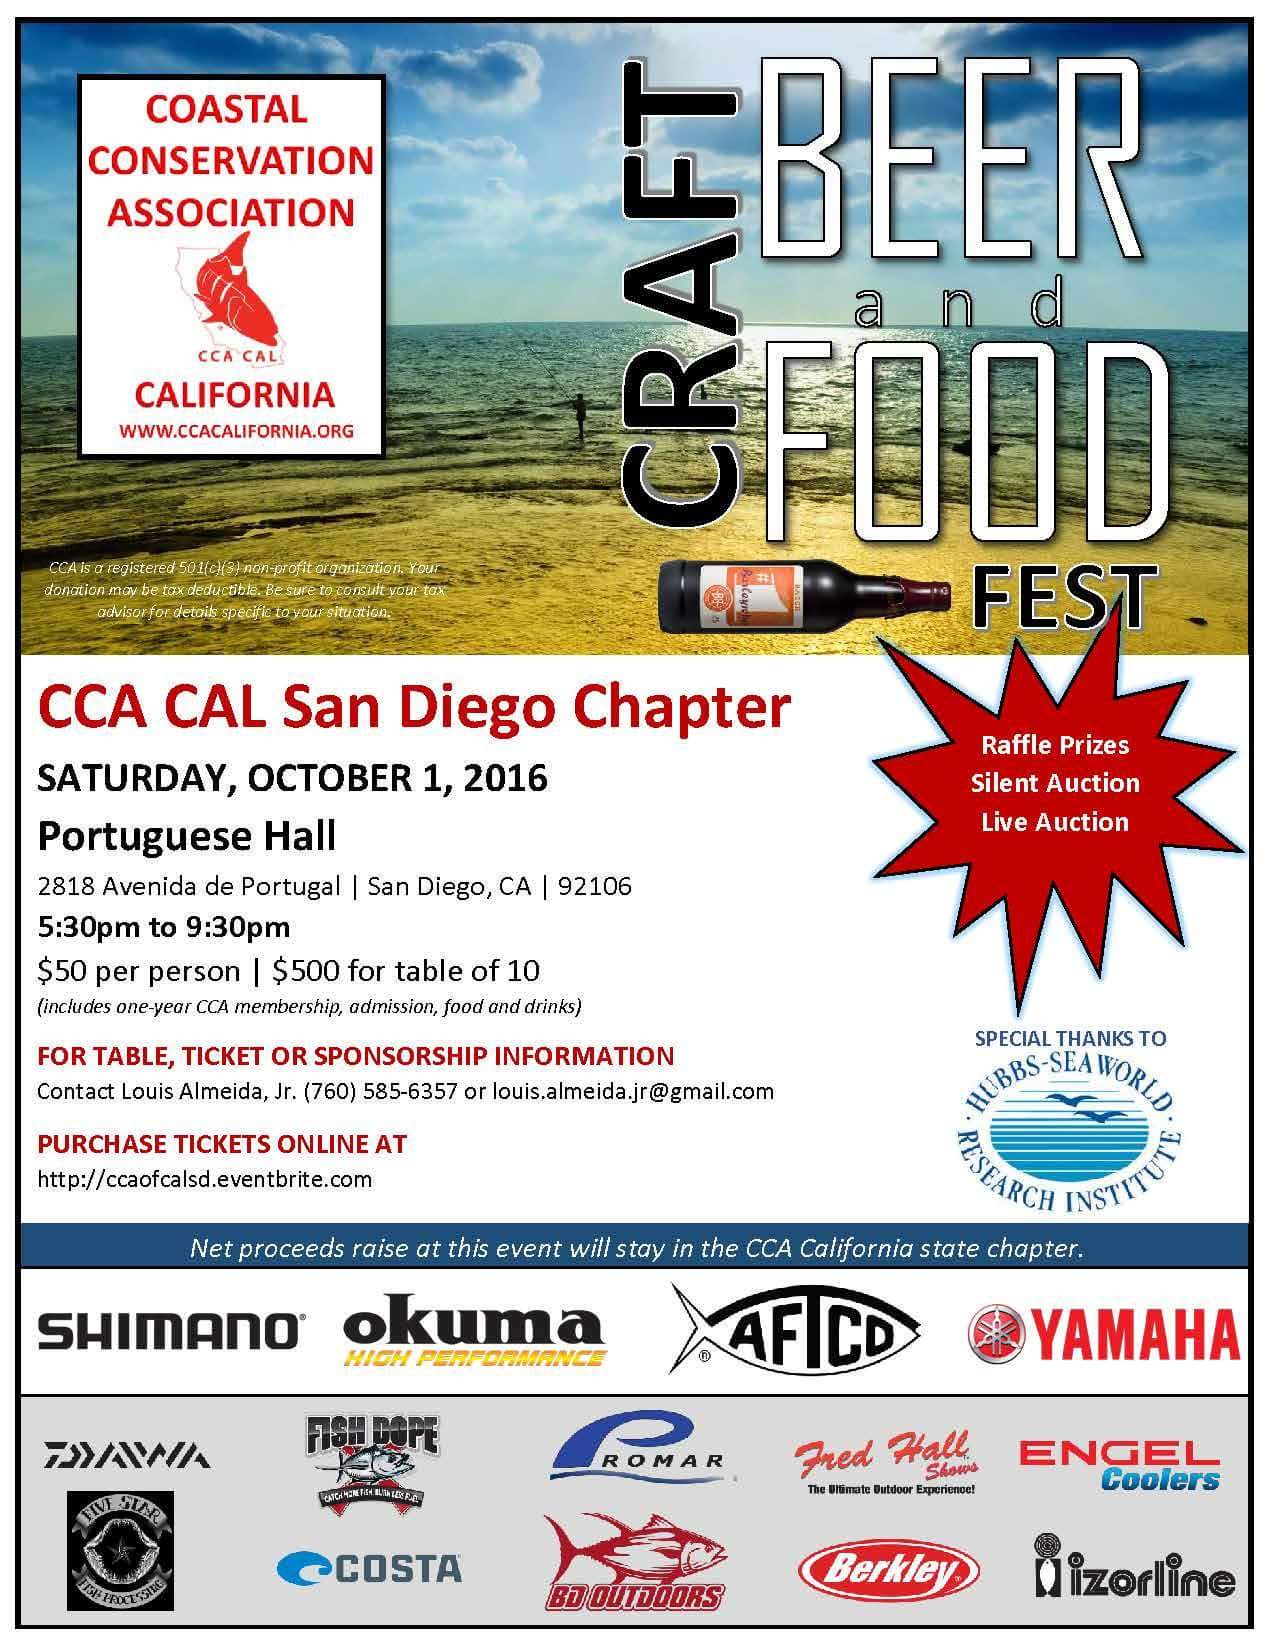 CCA Cal San Diego Chapter Event – Save the Date